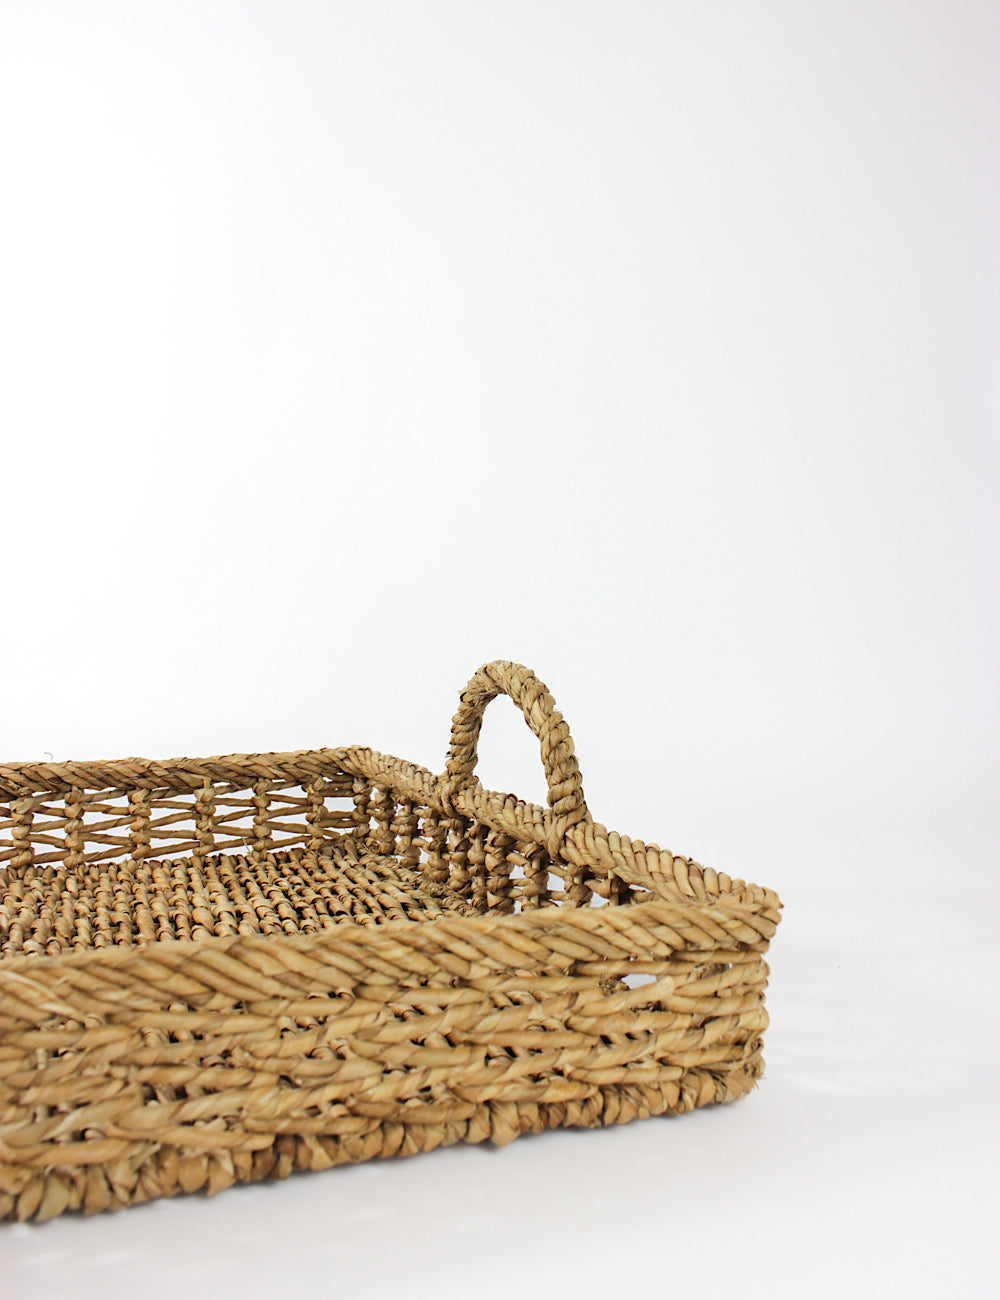 Close up side shot of a rattan tray with handles on two opposite ends.